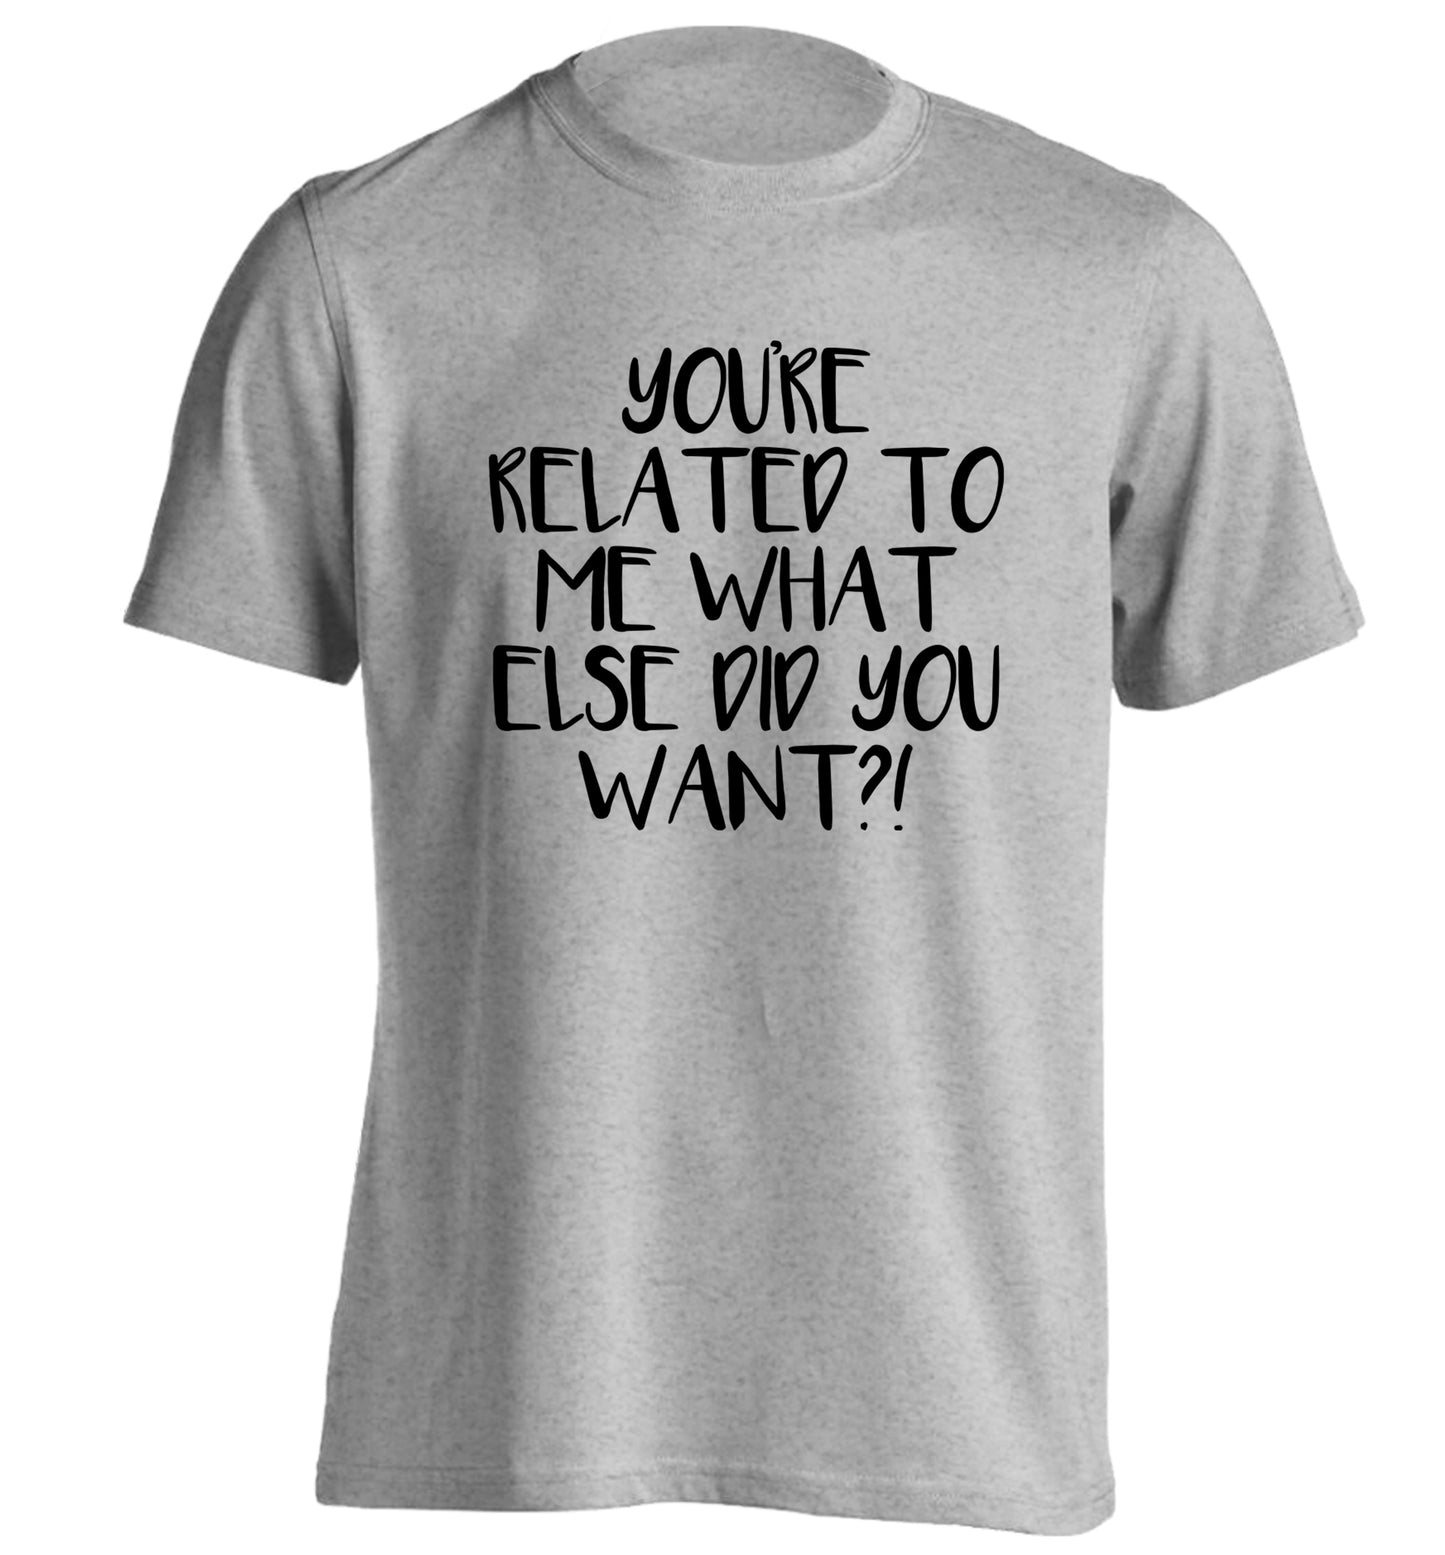 You're related to me what more do you want? adults unisex grey Tshirt 2XL